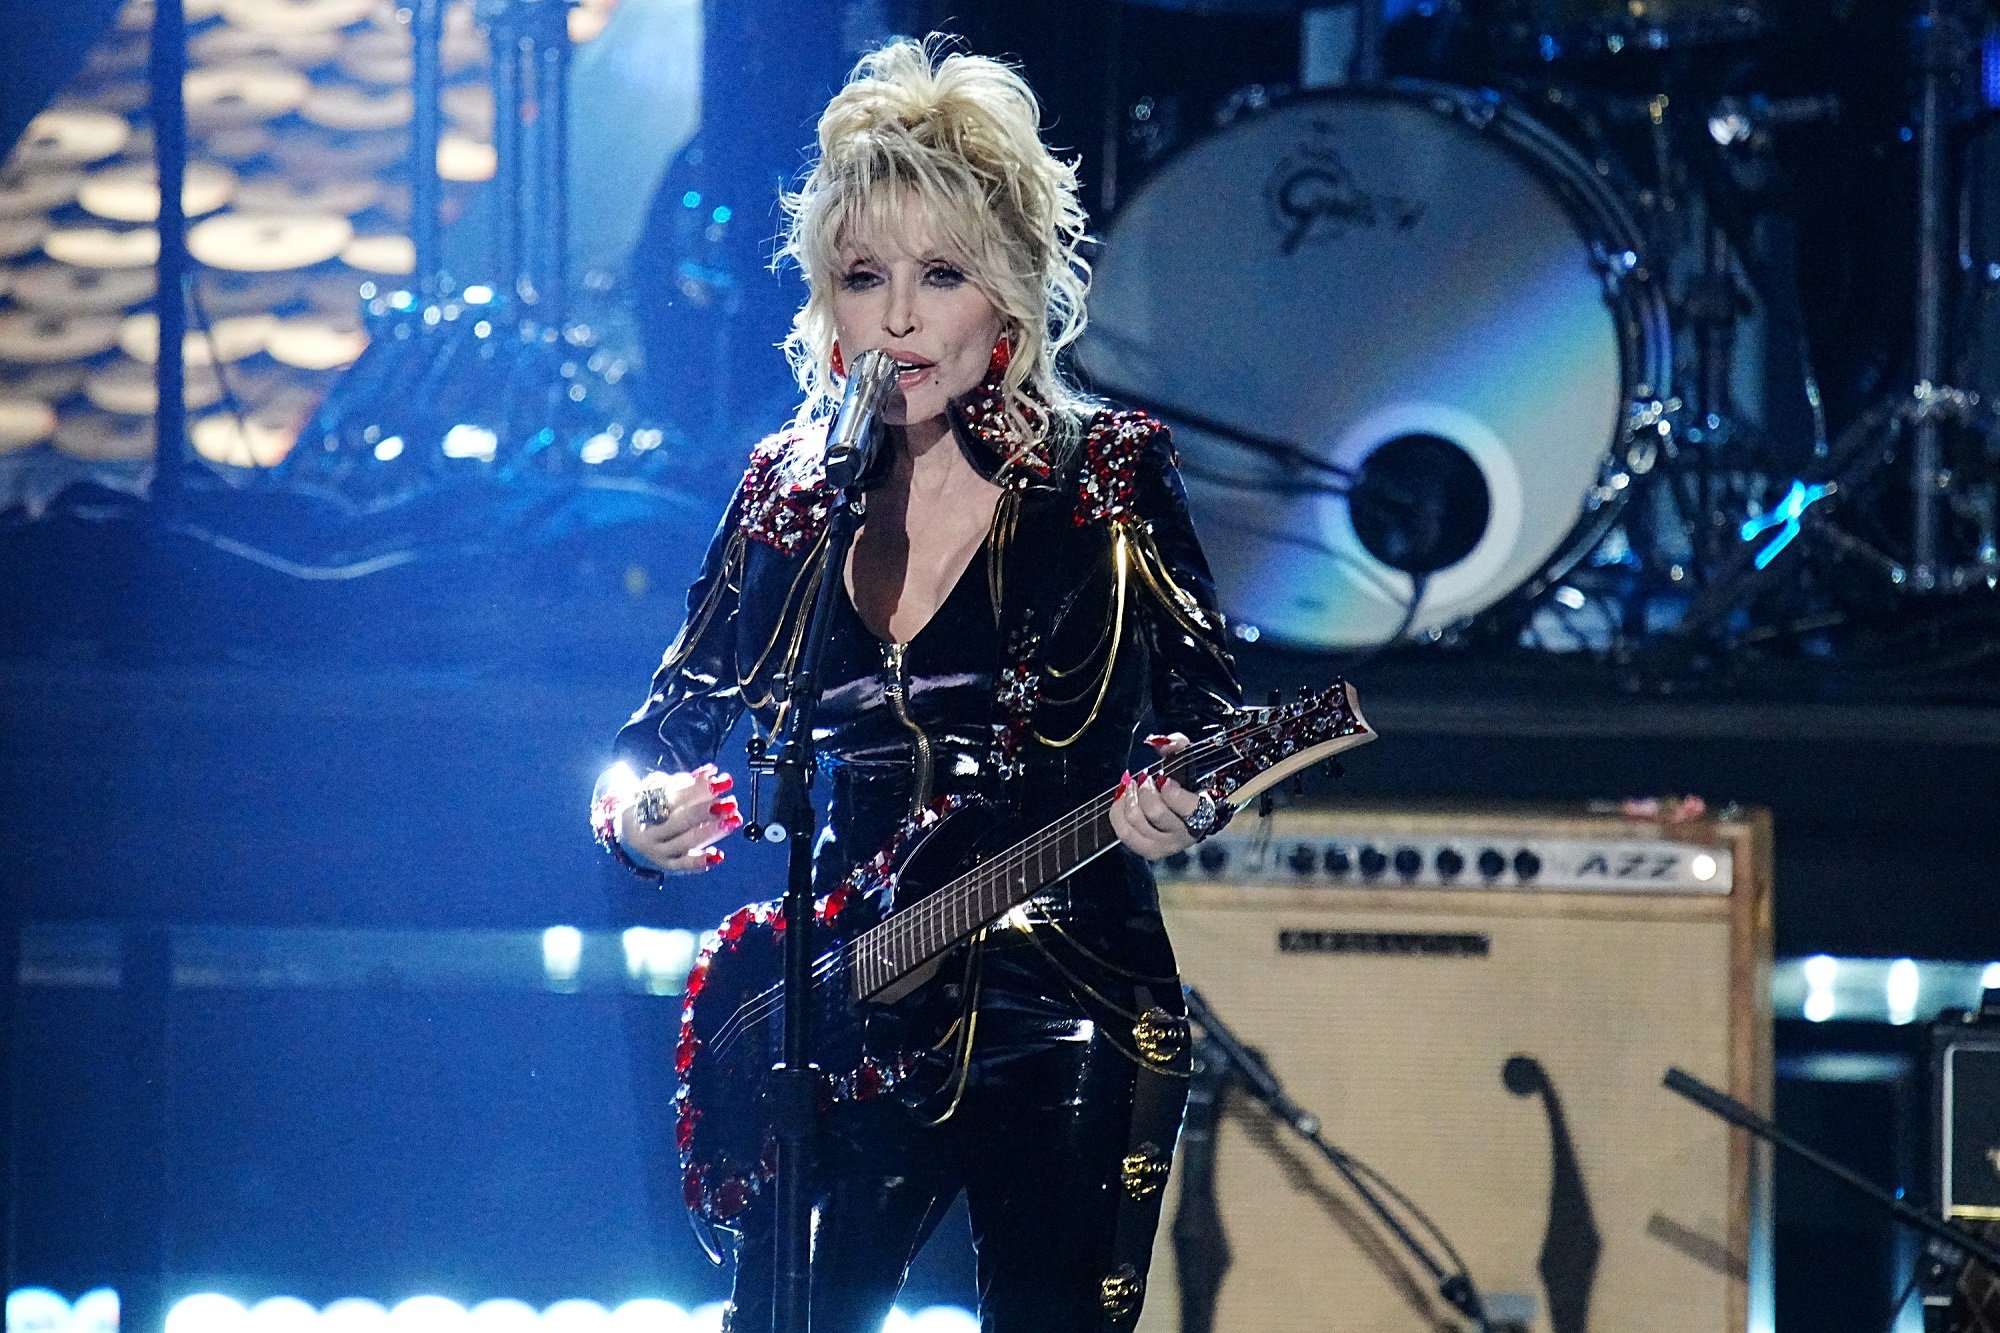 Dolly Parton performs onstage in a black leather outfit with a black guitar